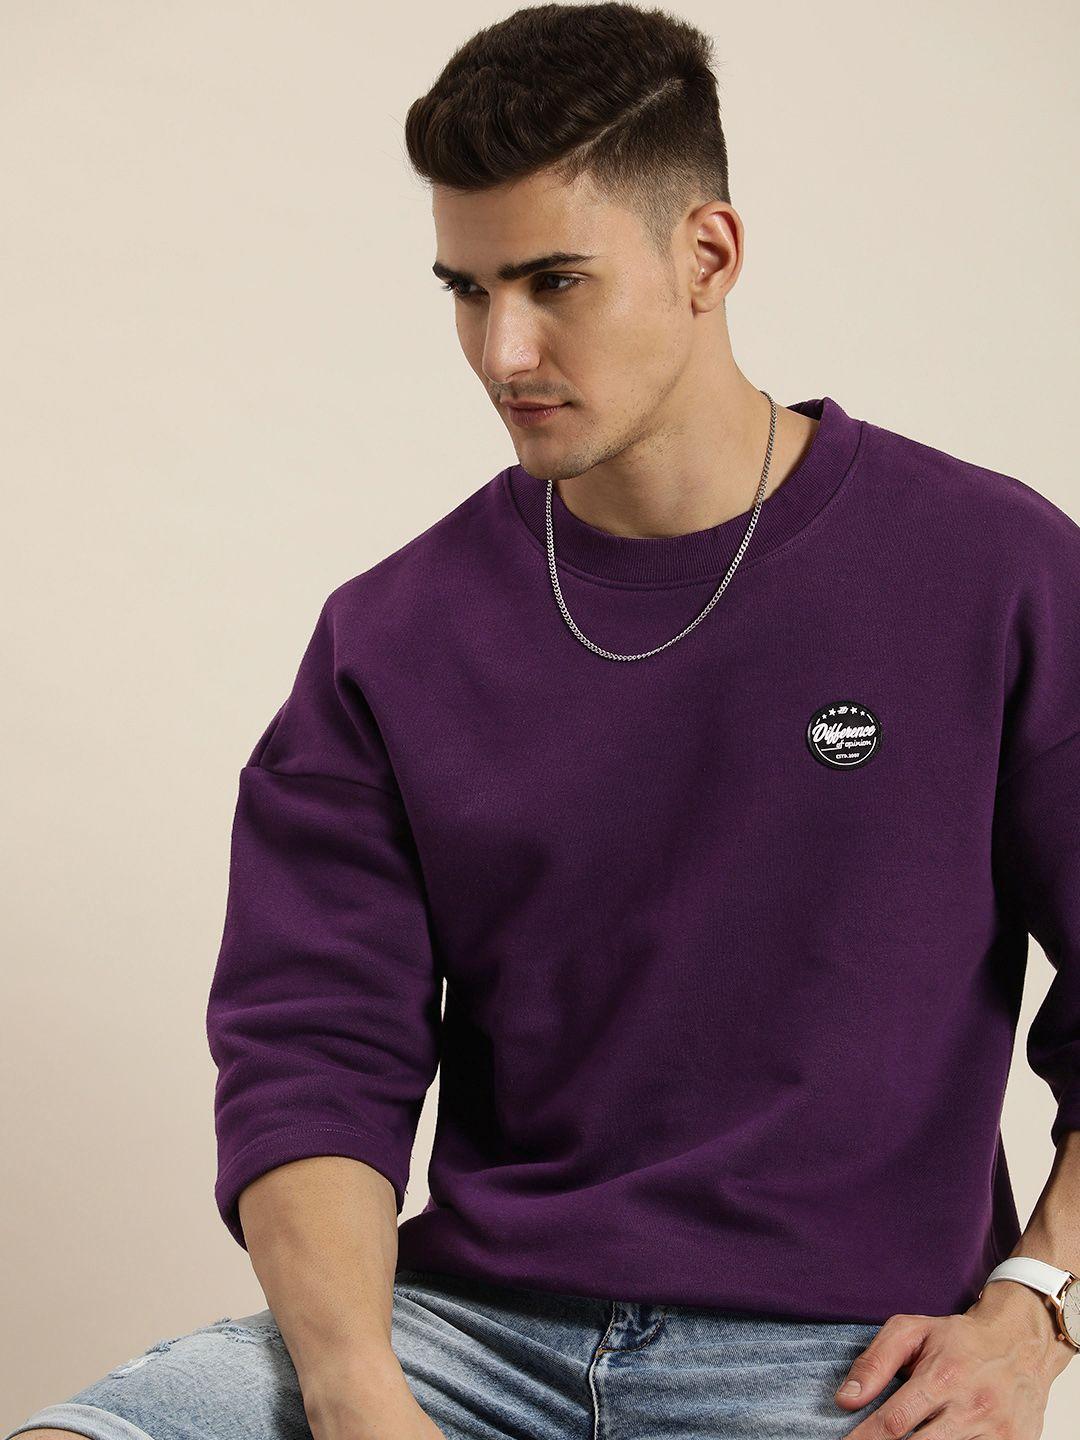 difference-of-opinion-men-oversized-fleece-sweatshirt-with-applique-detail